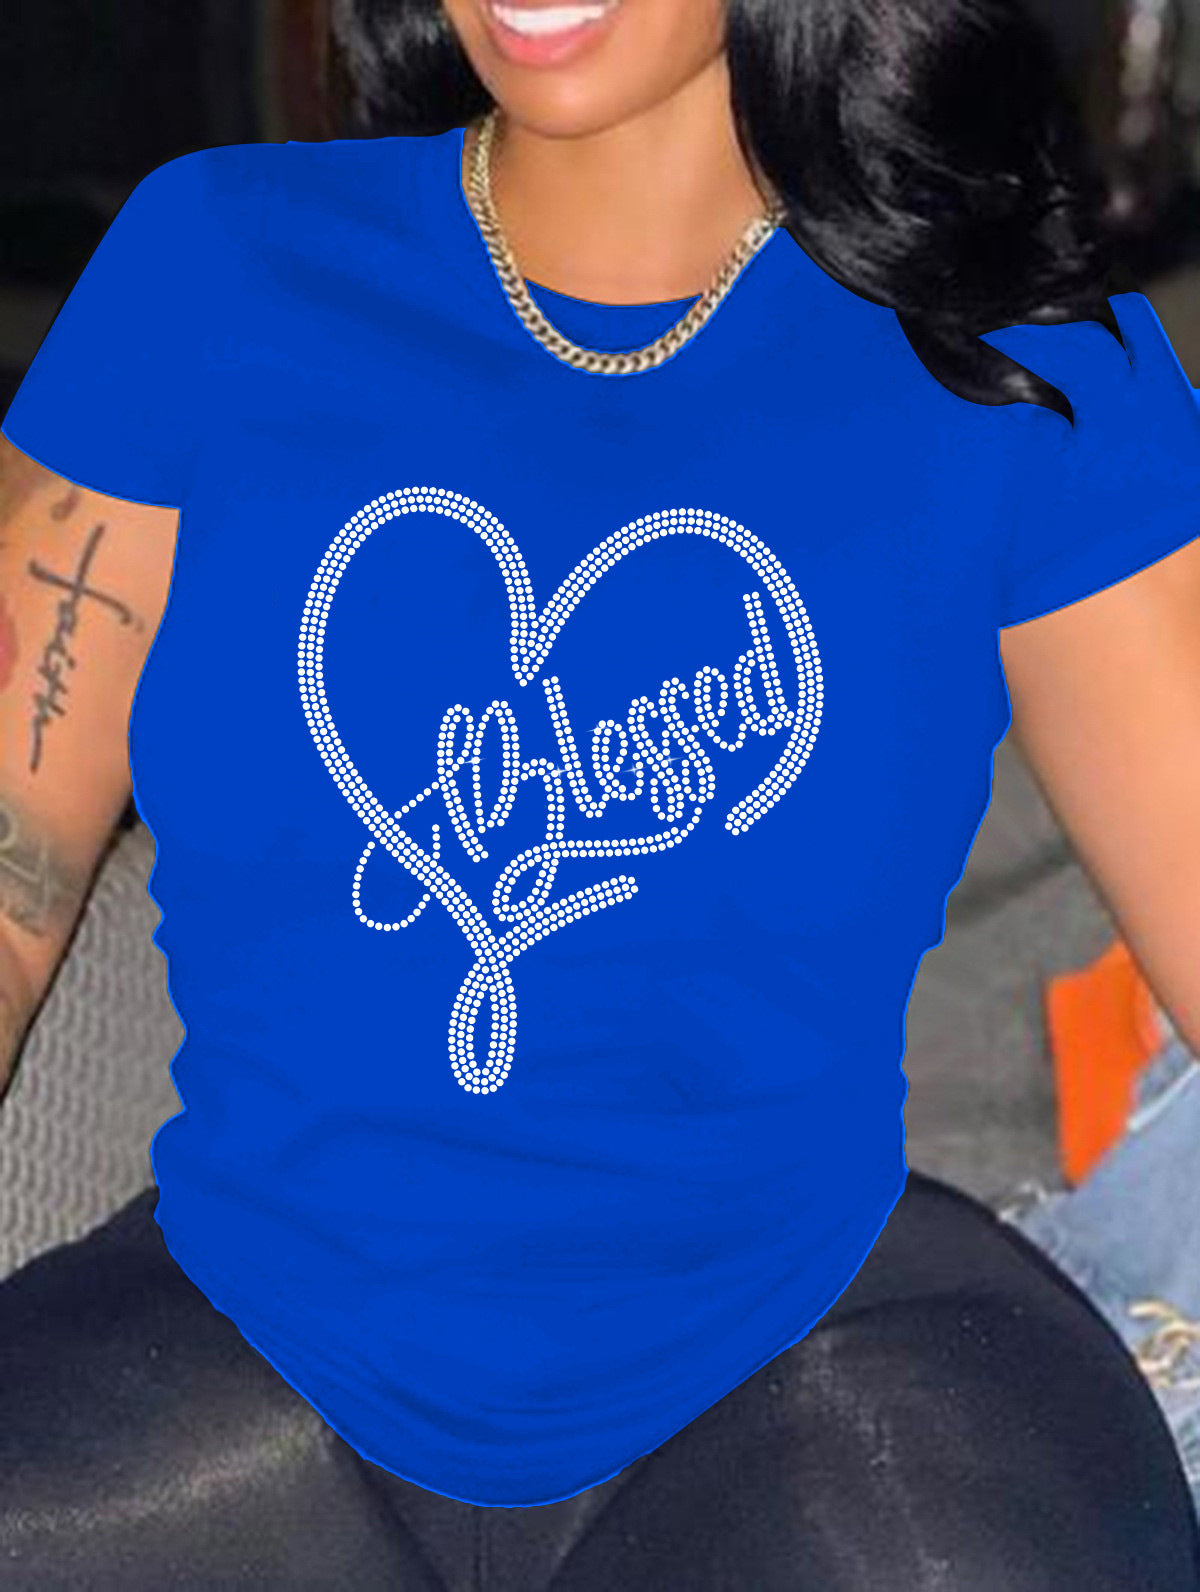 Blessed in the Heart Rhinestone Round Neck T-Shirt